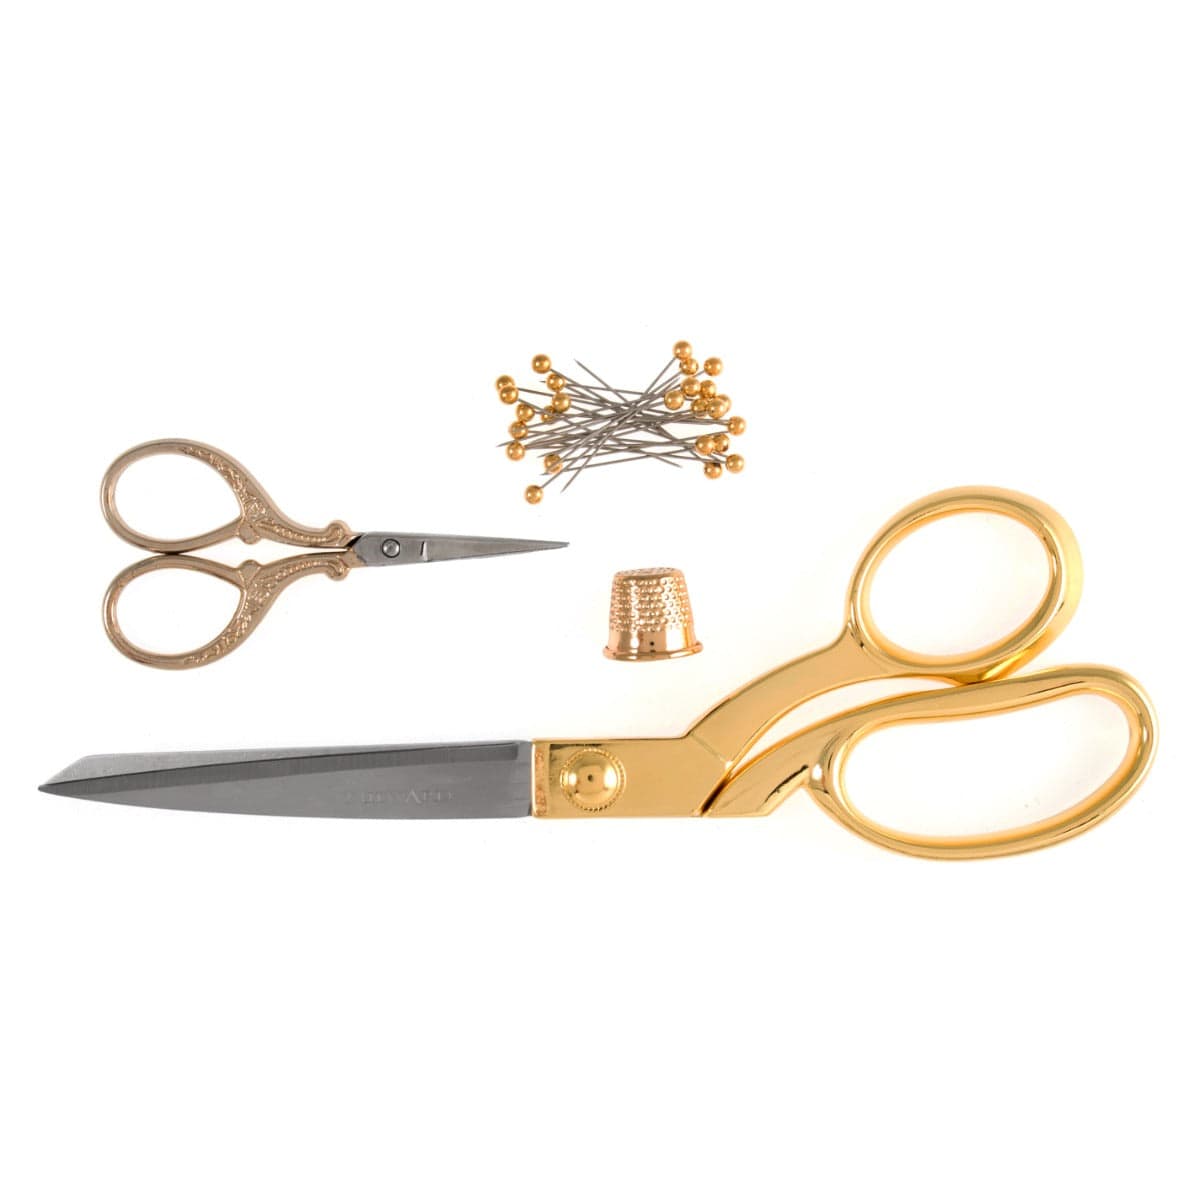 Scissors Gift Set Dressmaking 21.5cm and Embroidery 9.5cm Thimble and Pins Gold